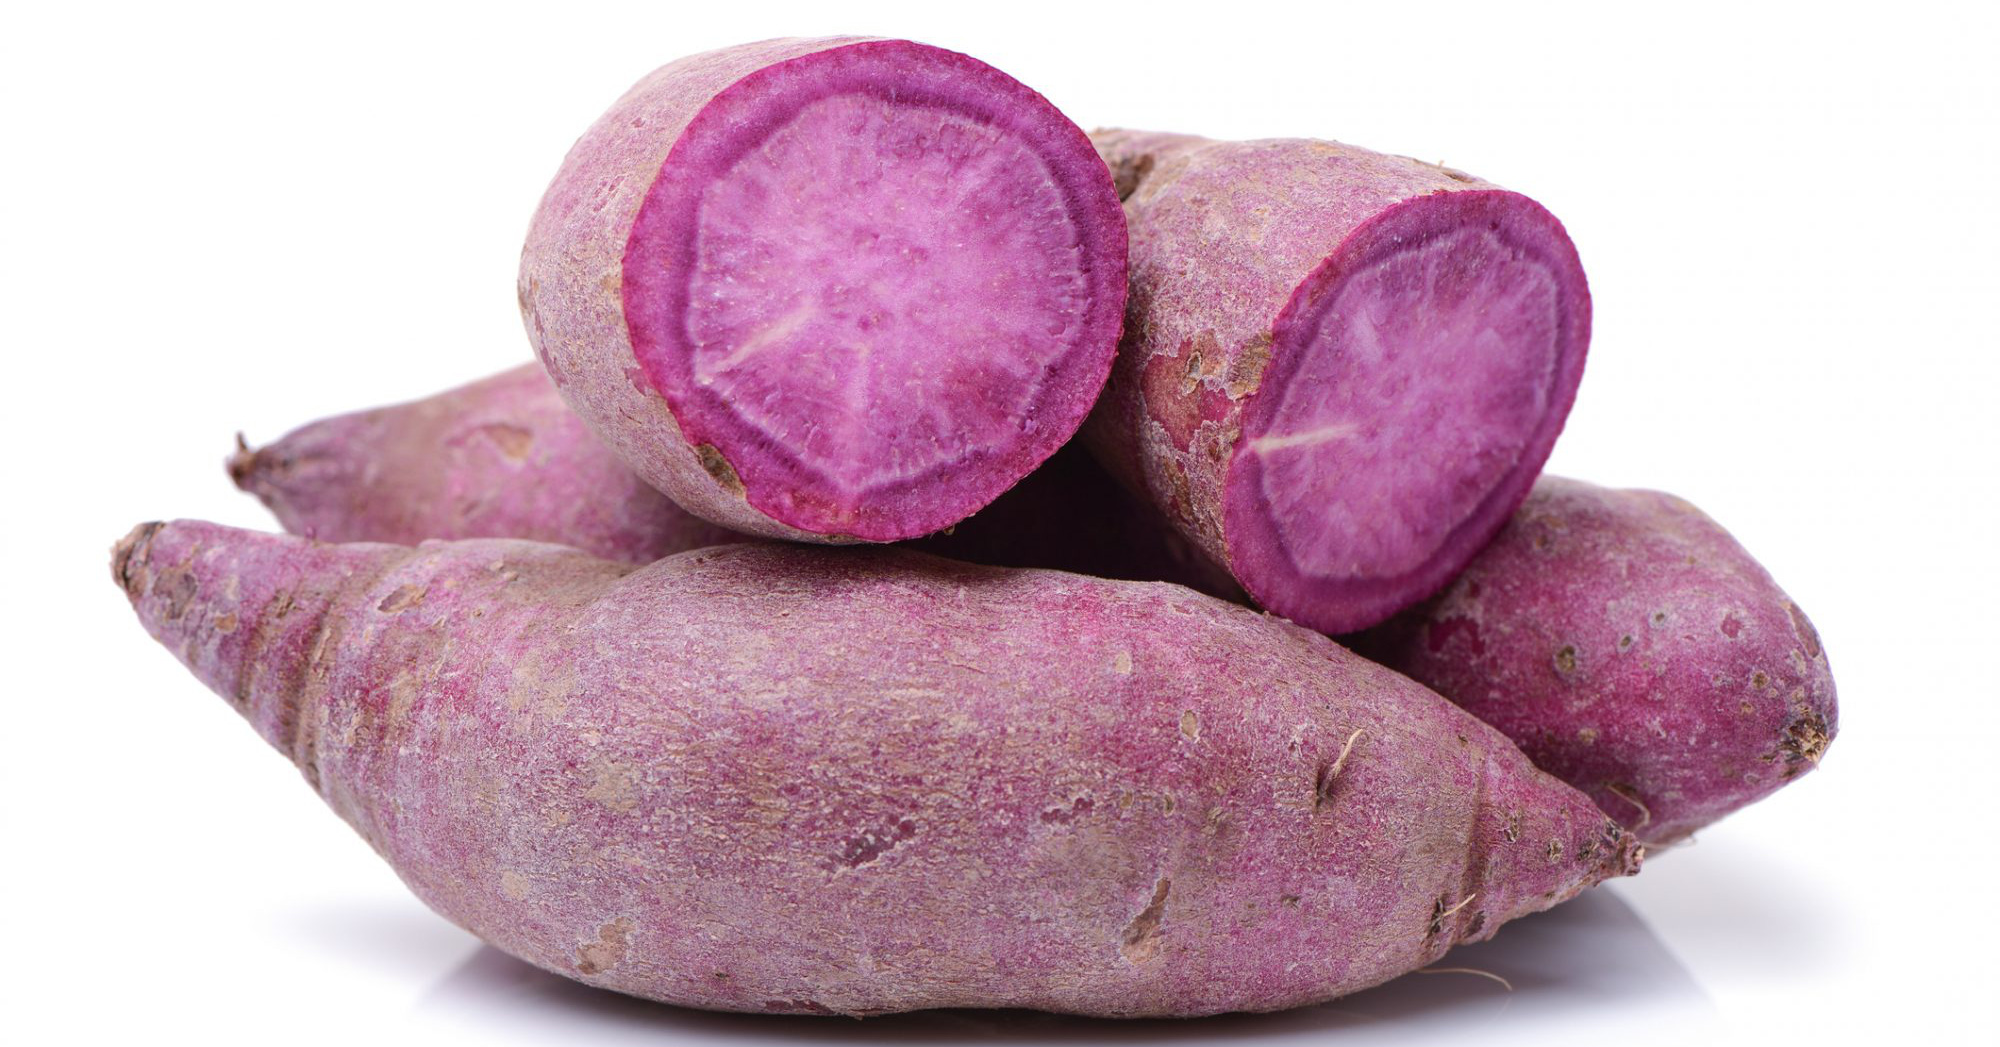 Which sweet potato helps fight cancer and aging?